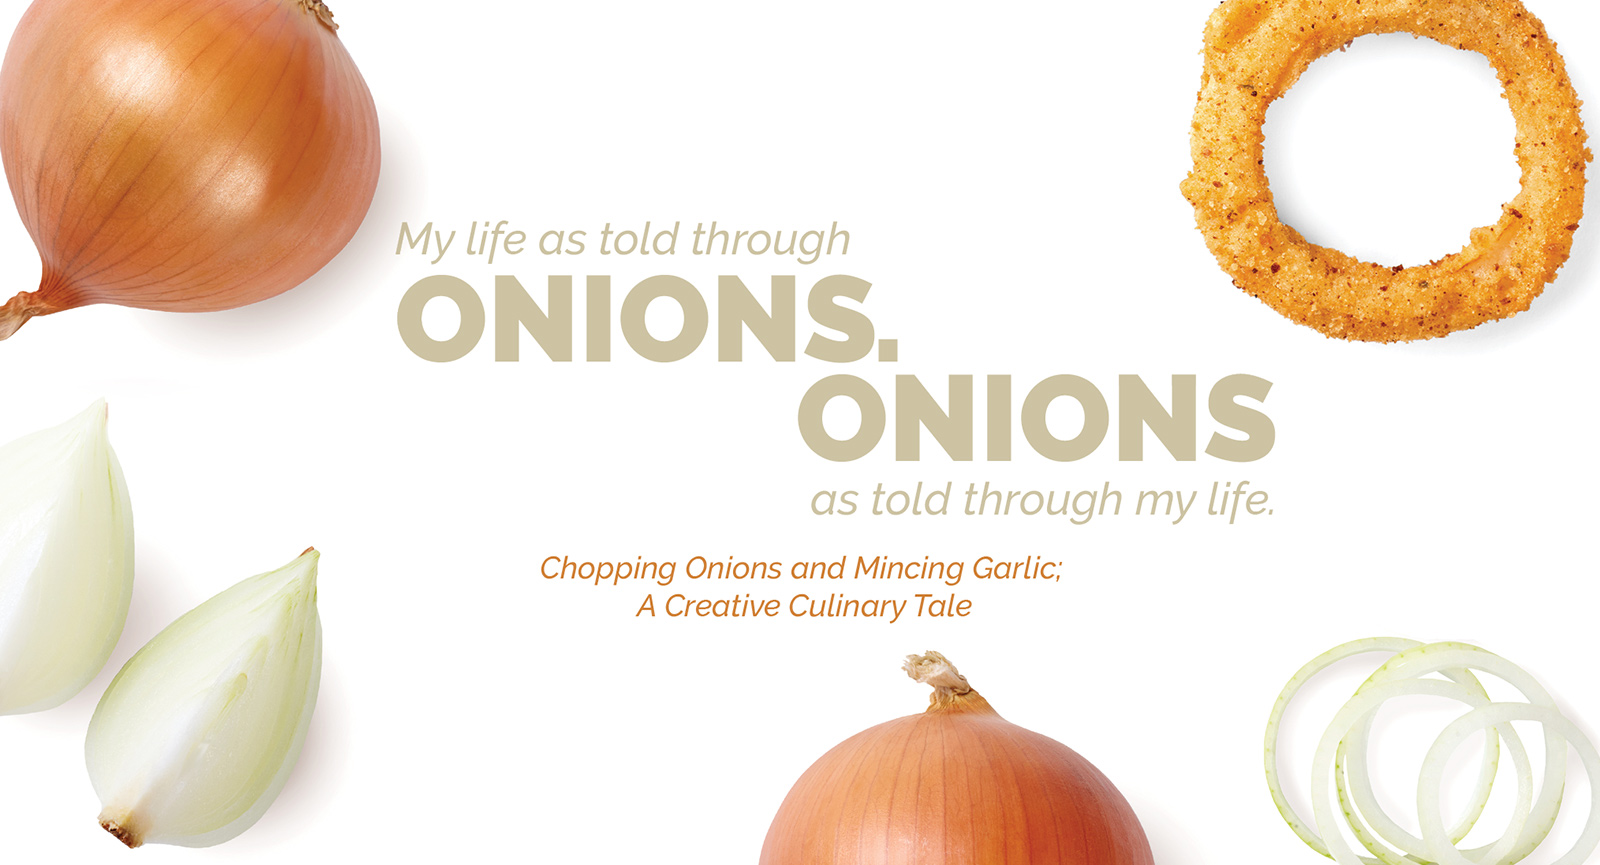 My life as told through Onions. Onions as told through my life. Chopping onions and mincing garlic; a creative culinary tale